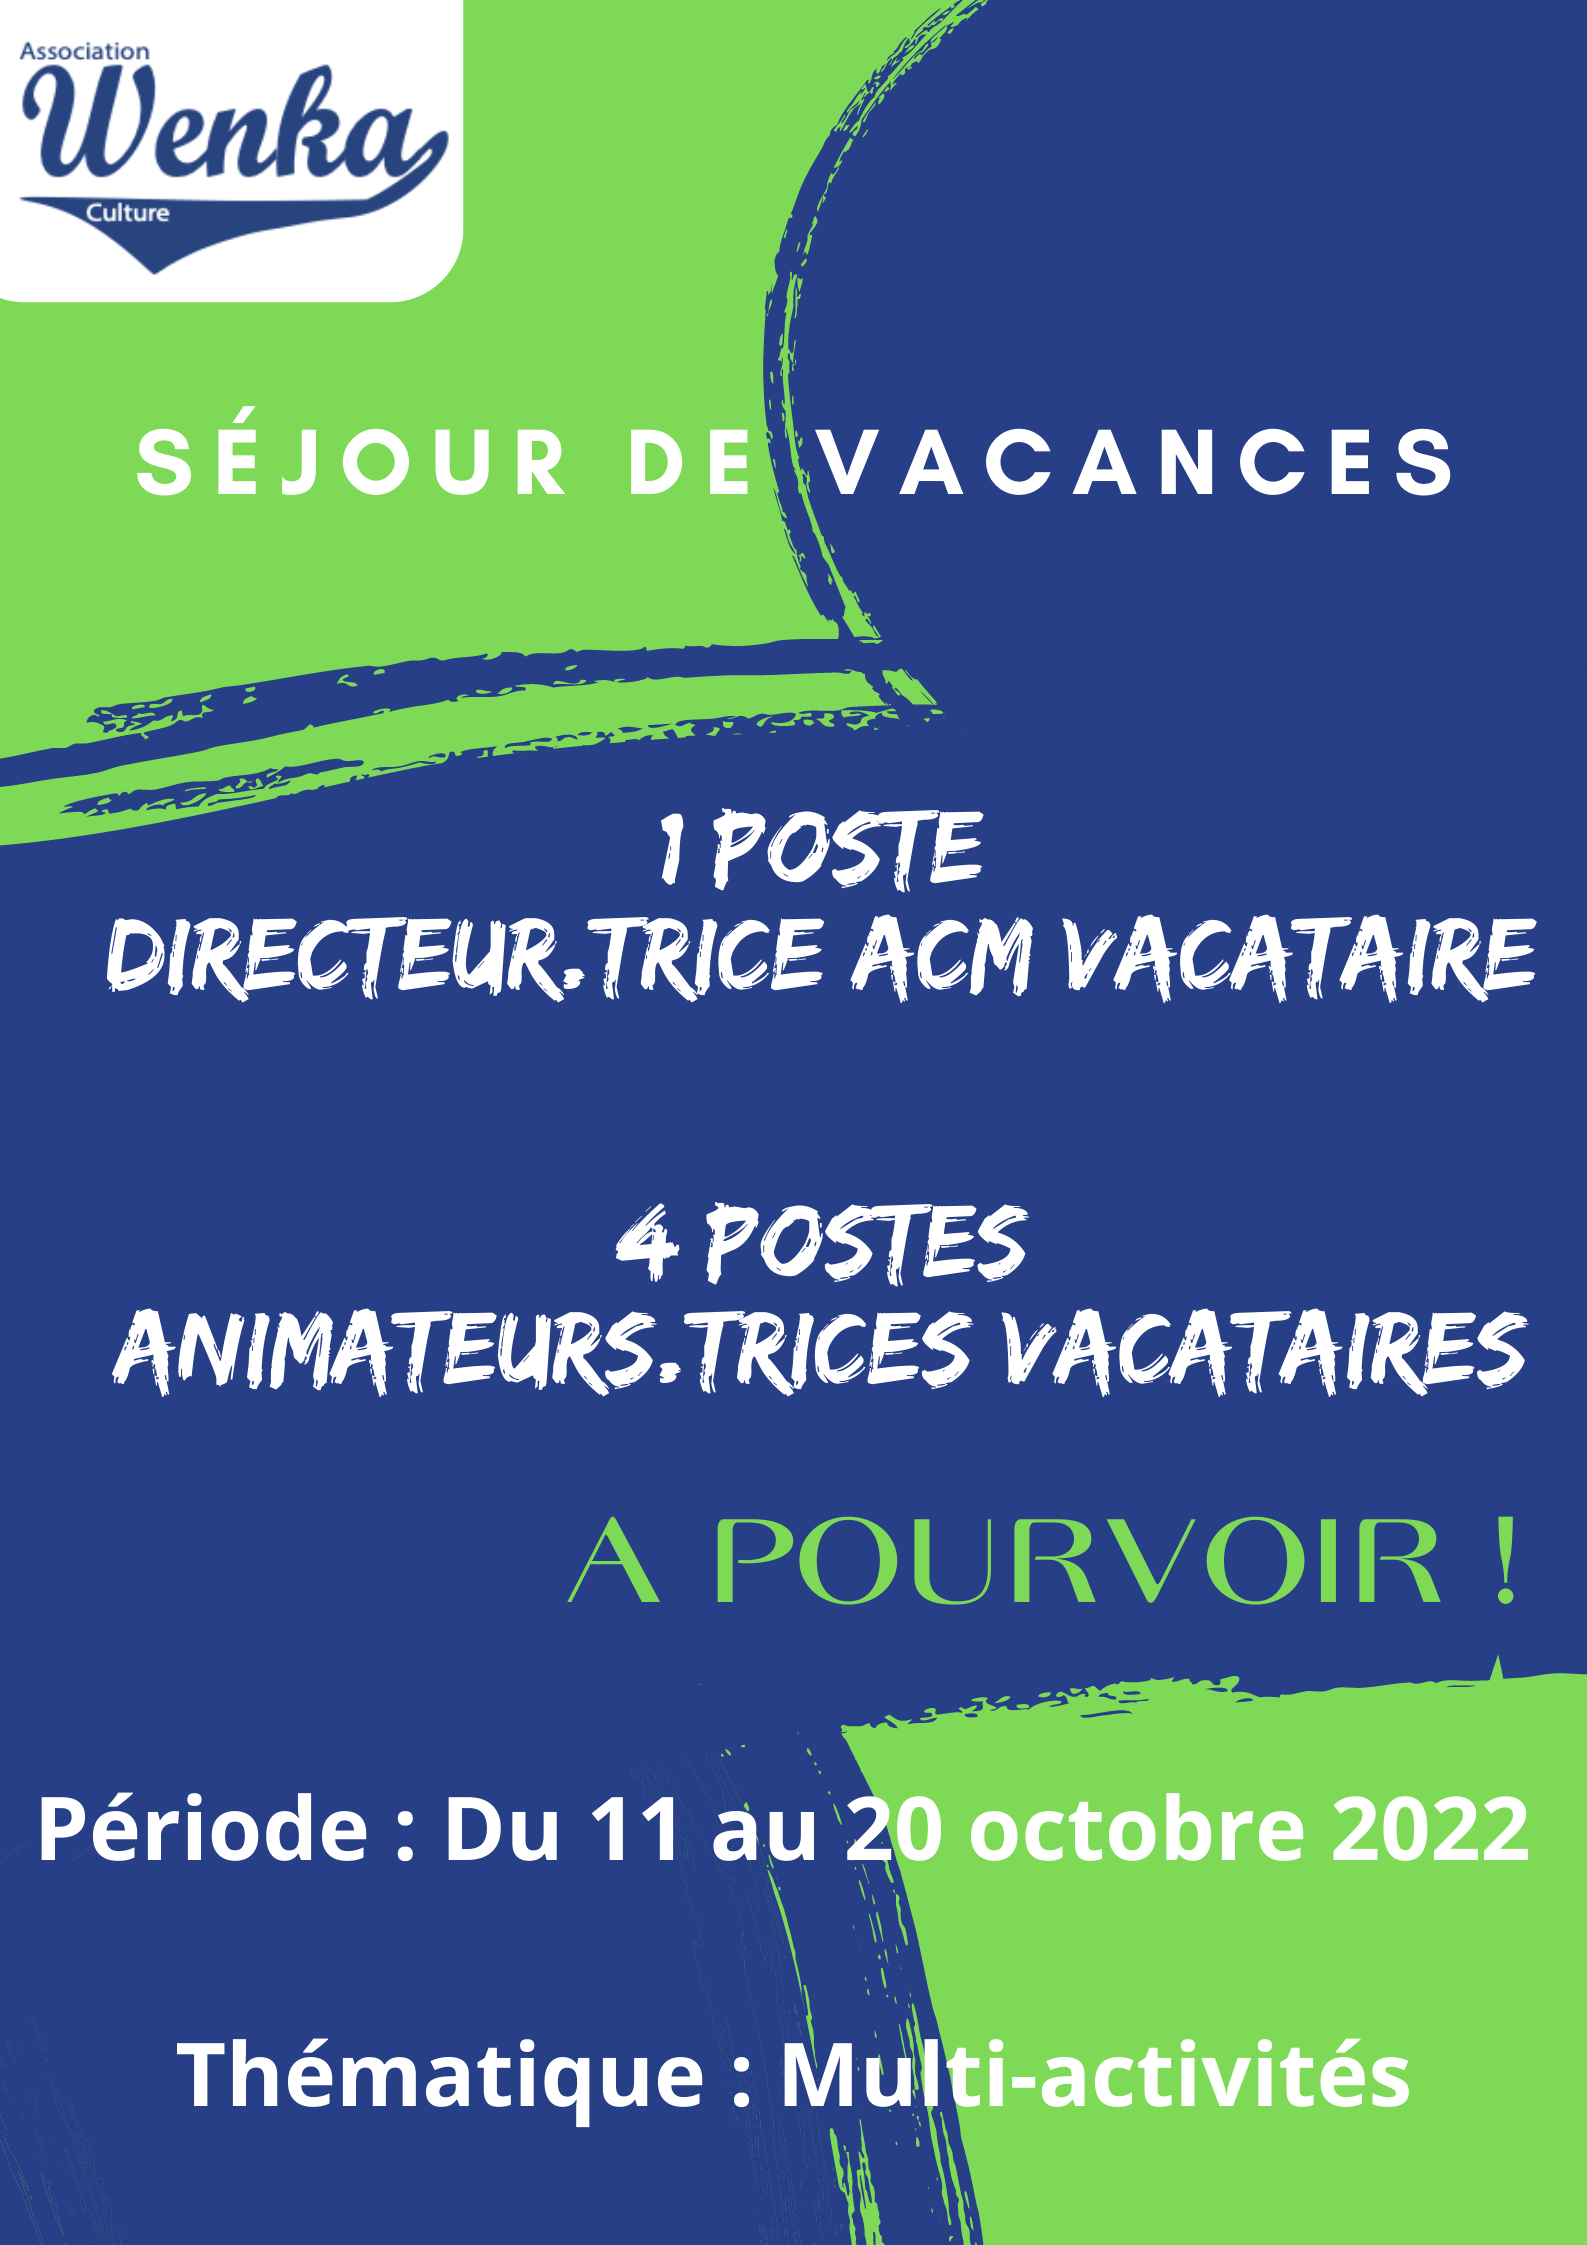 ANIMATEURS.TRICES VACATAIRES